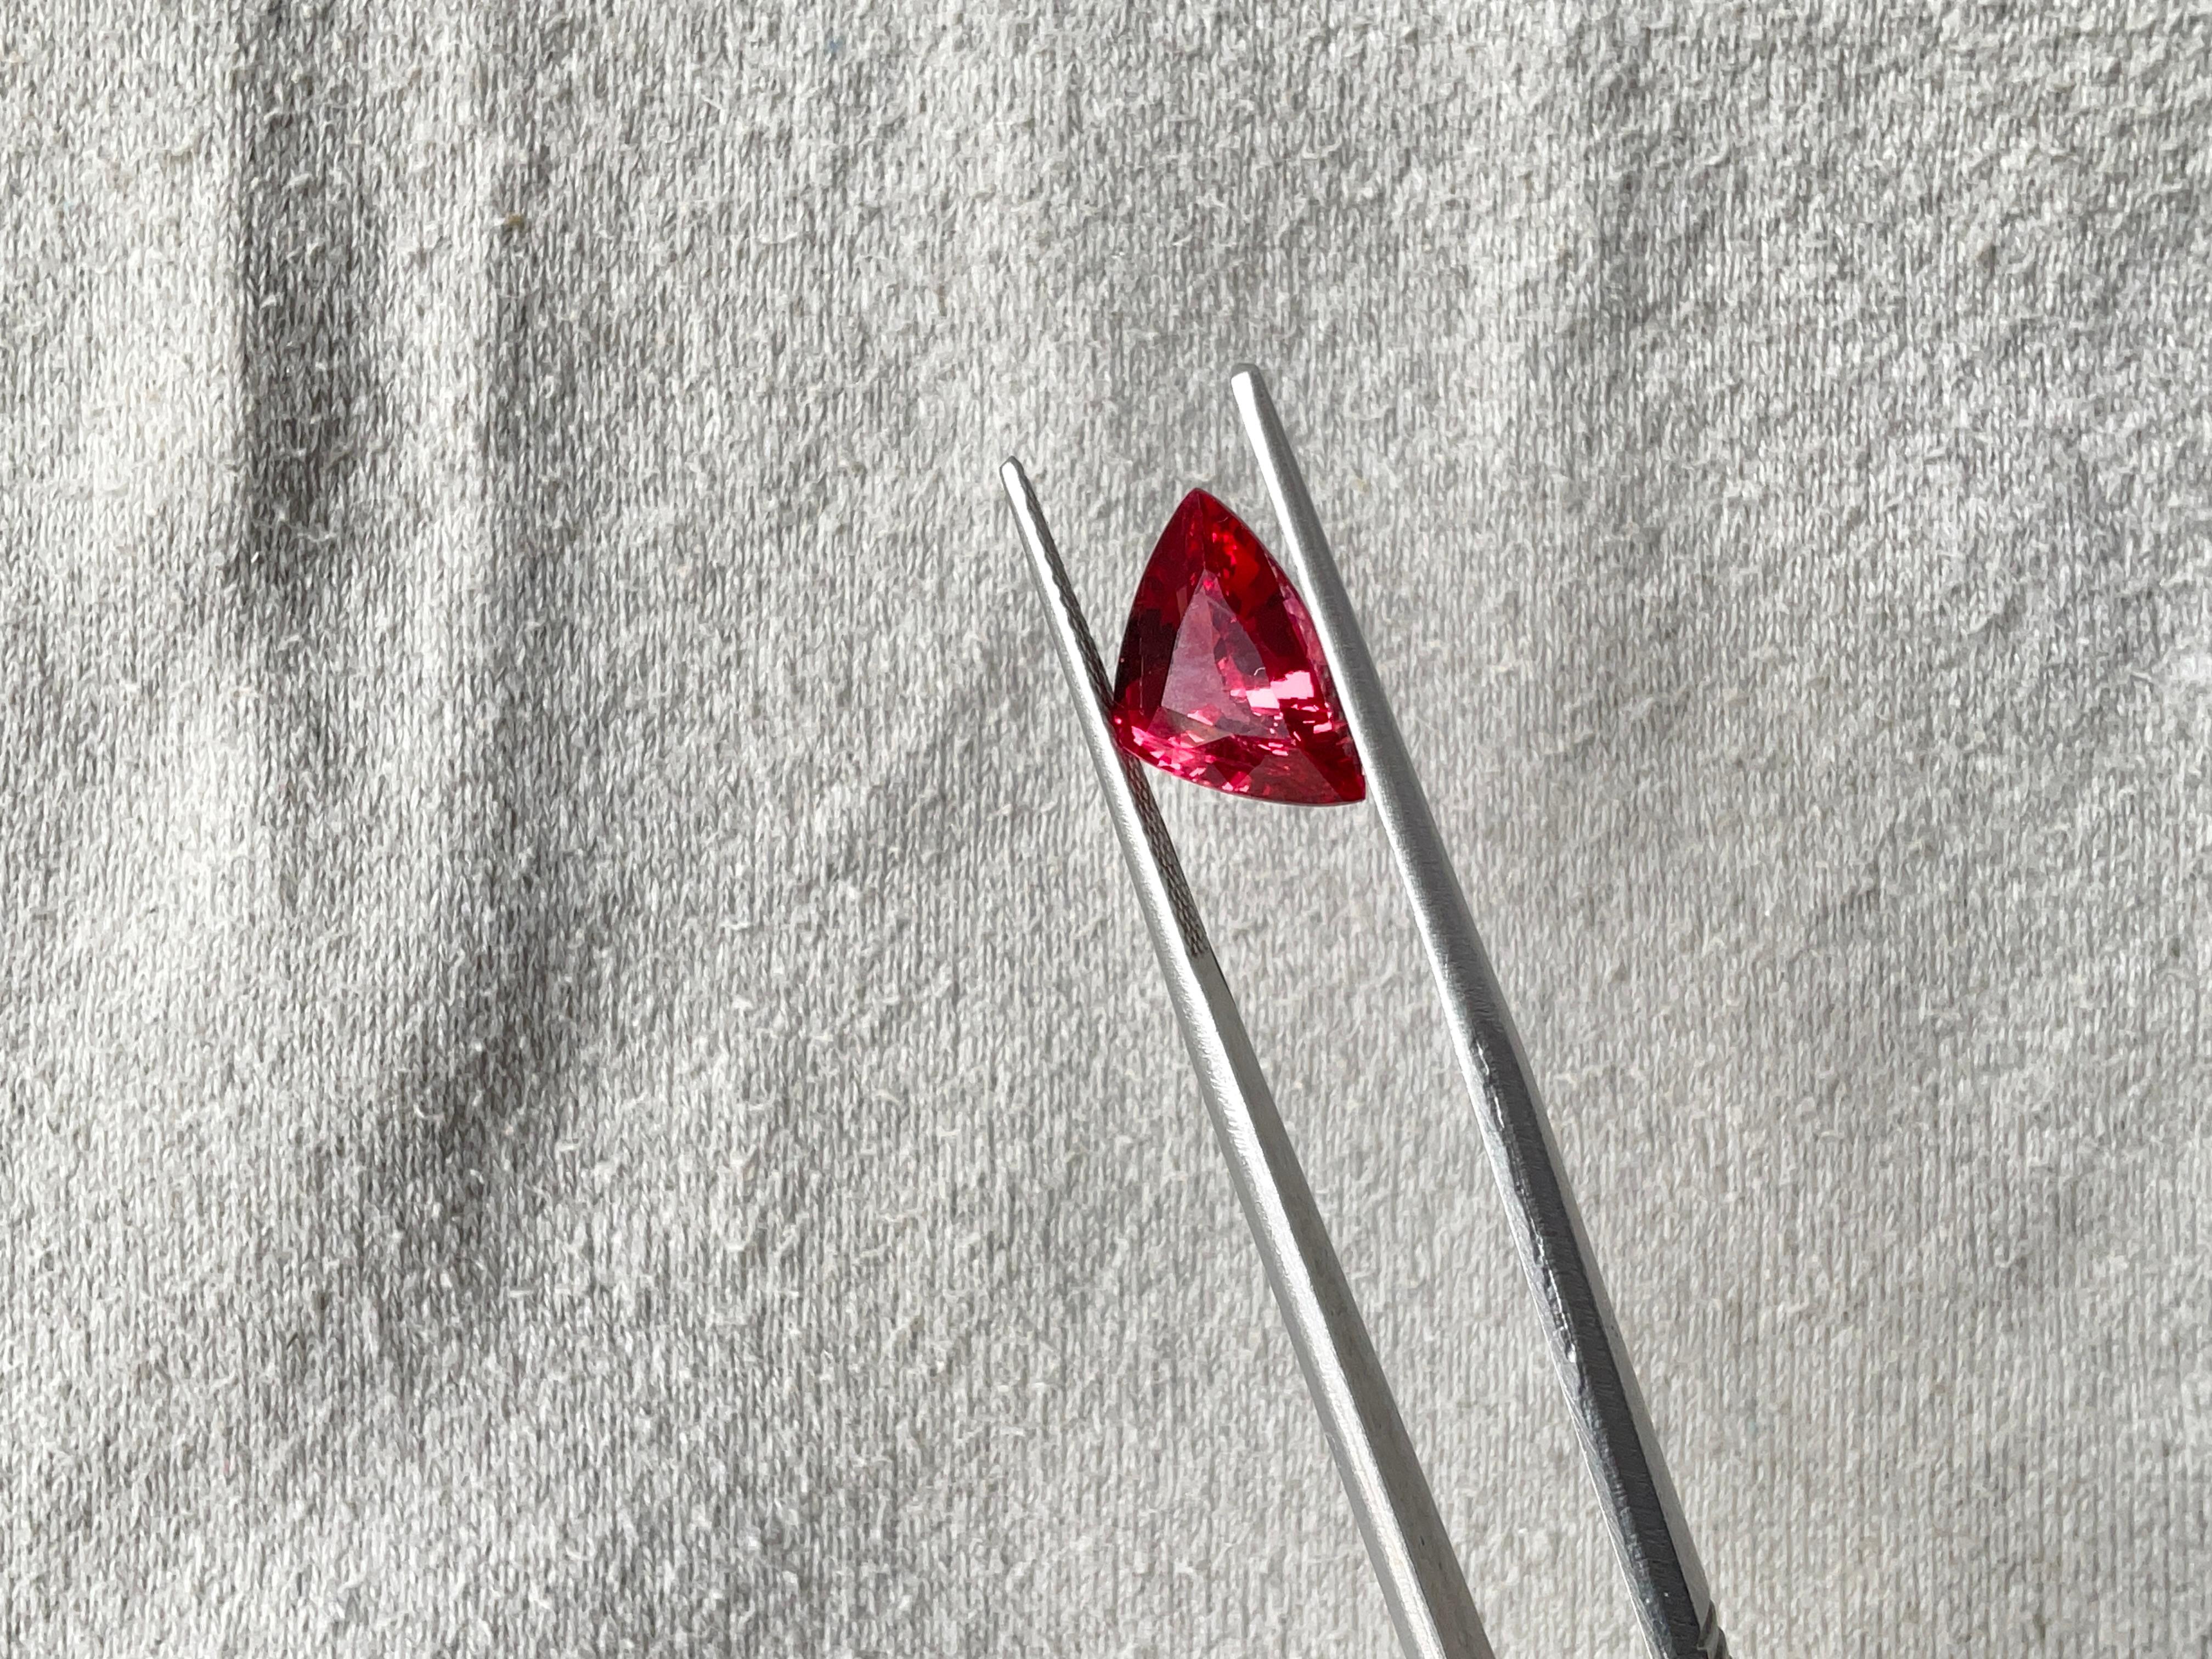 certified 3.02 carats burmese red spinel natural triangular cutstone natural gem For Sale 1